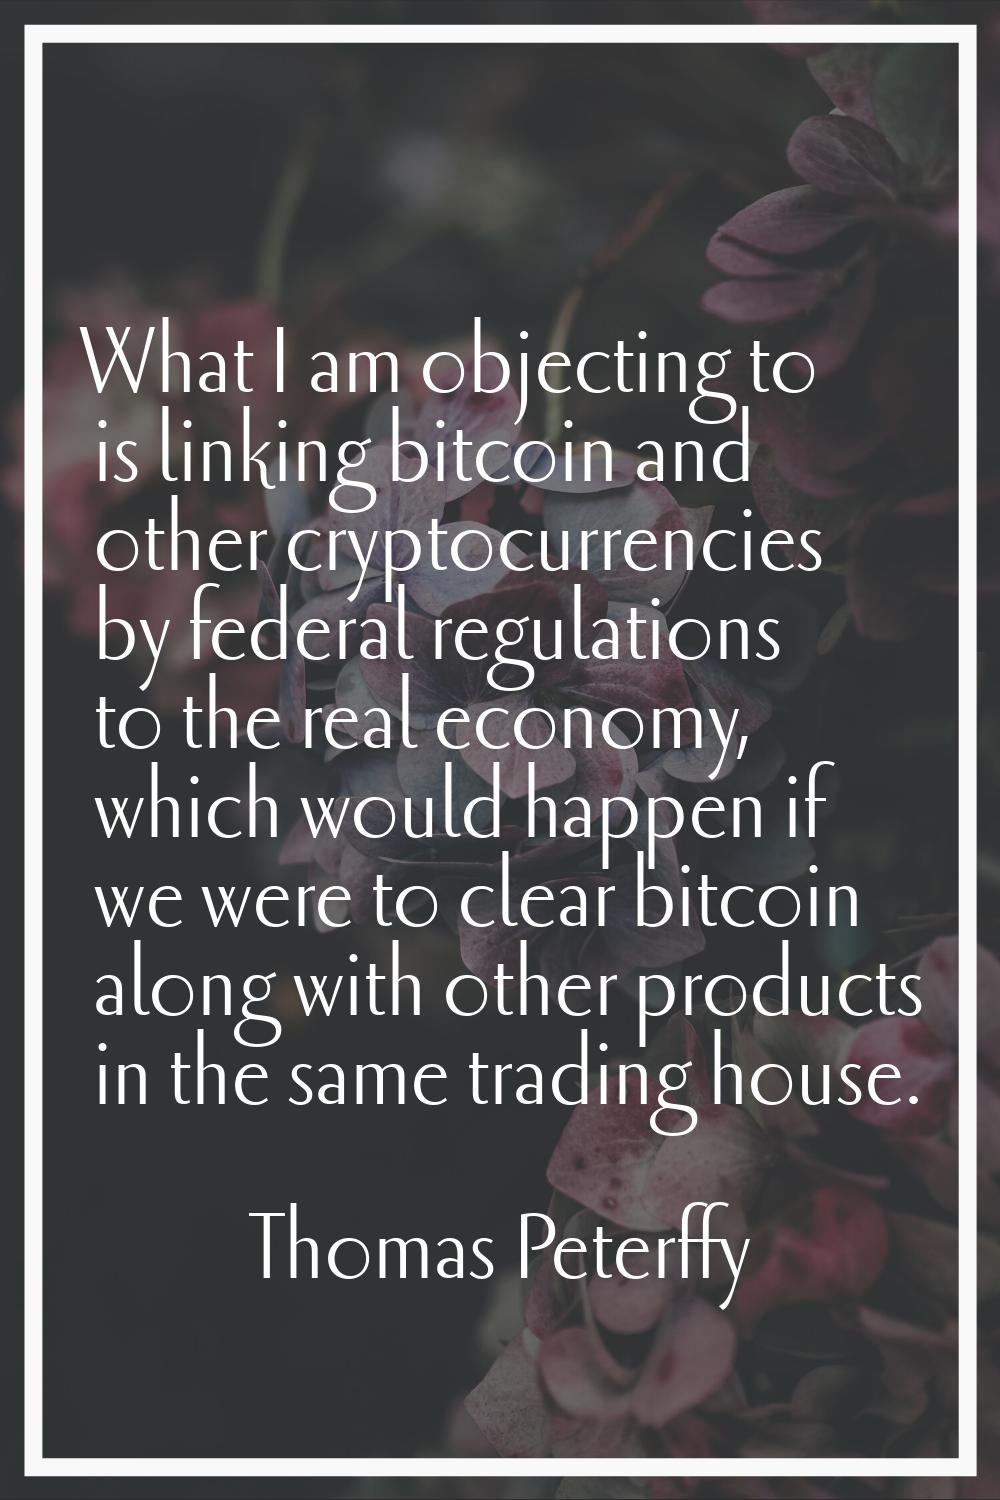 What I am objecting to is linking bitcoin and other cryptocurrencies by federal regulations to the 